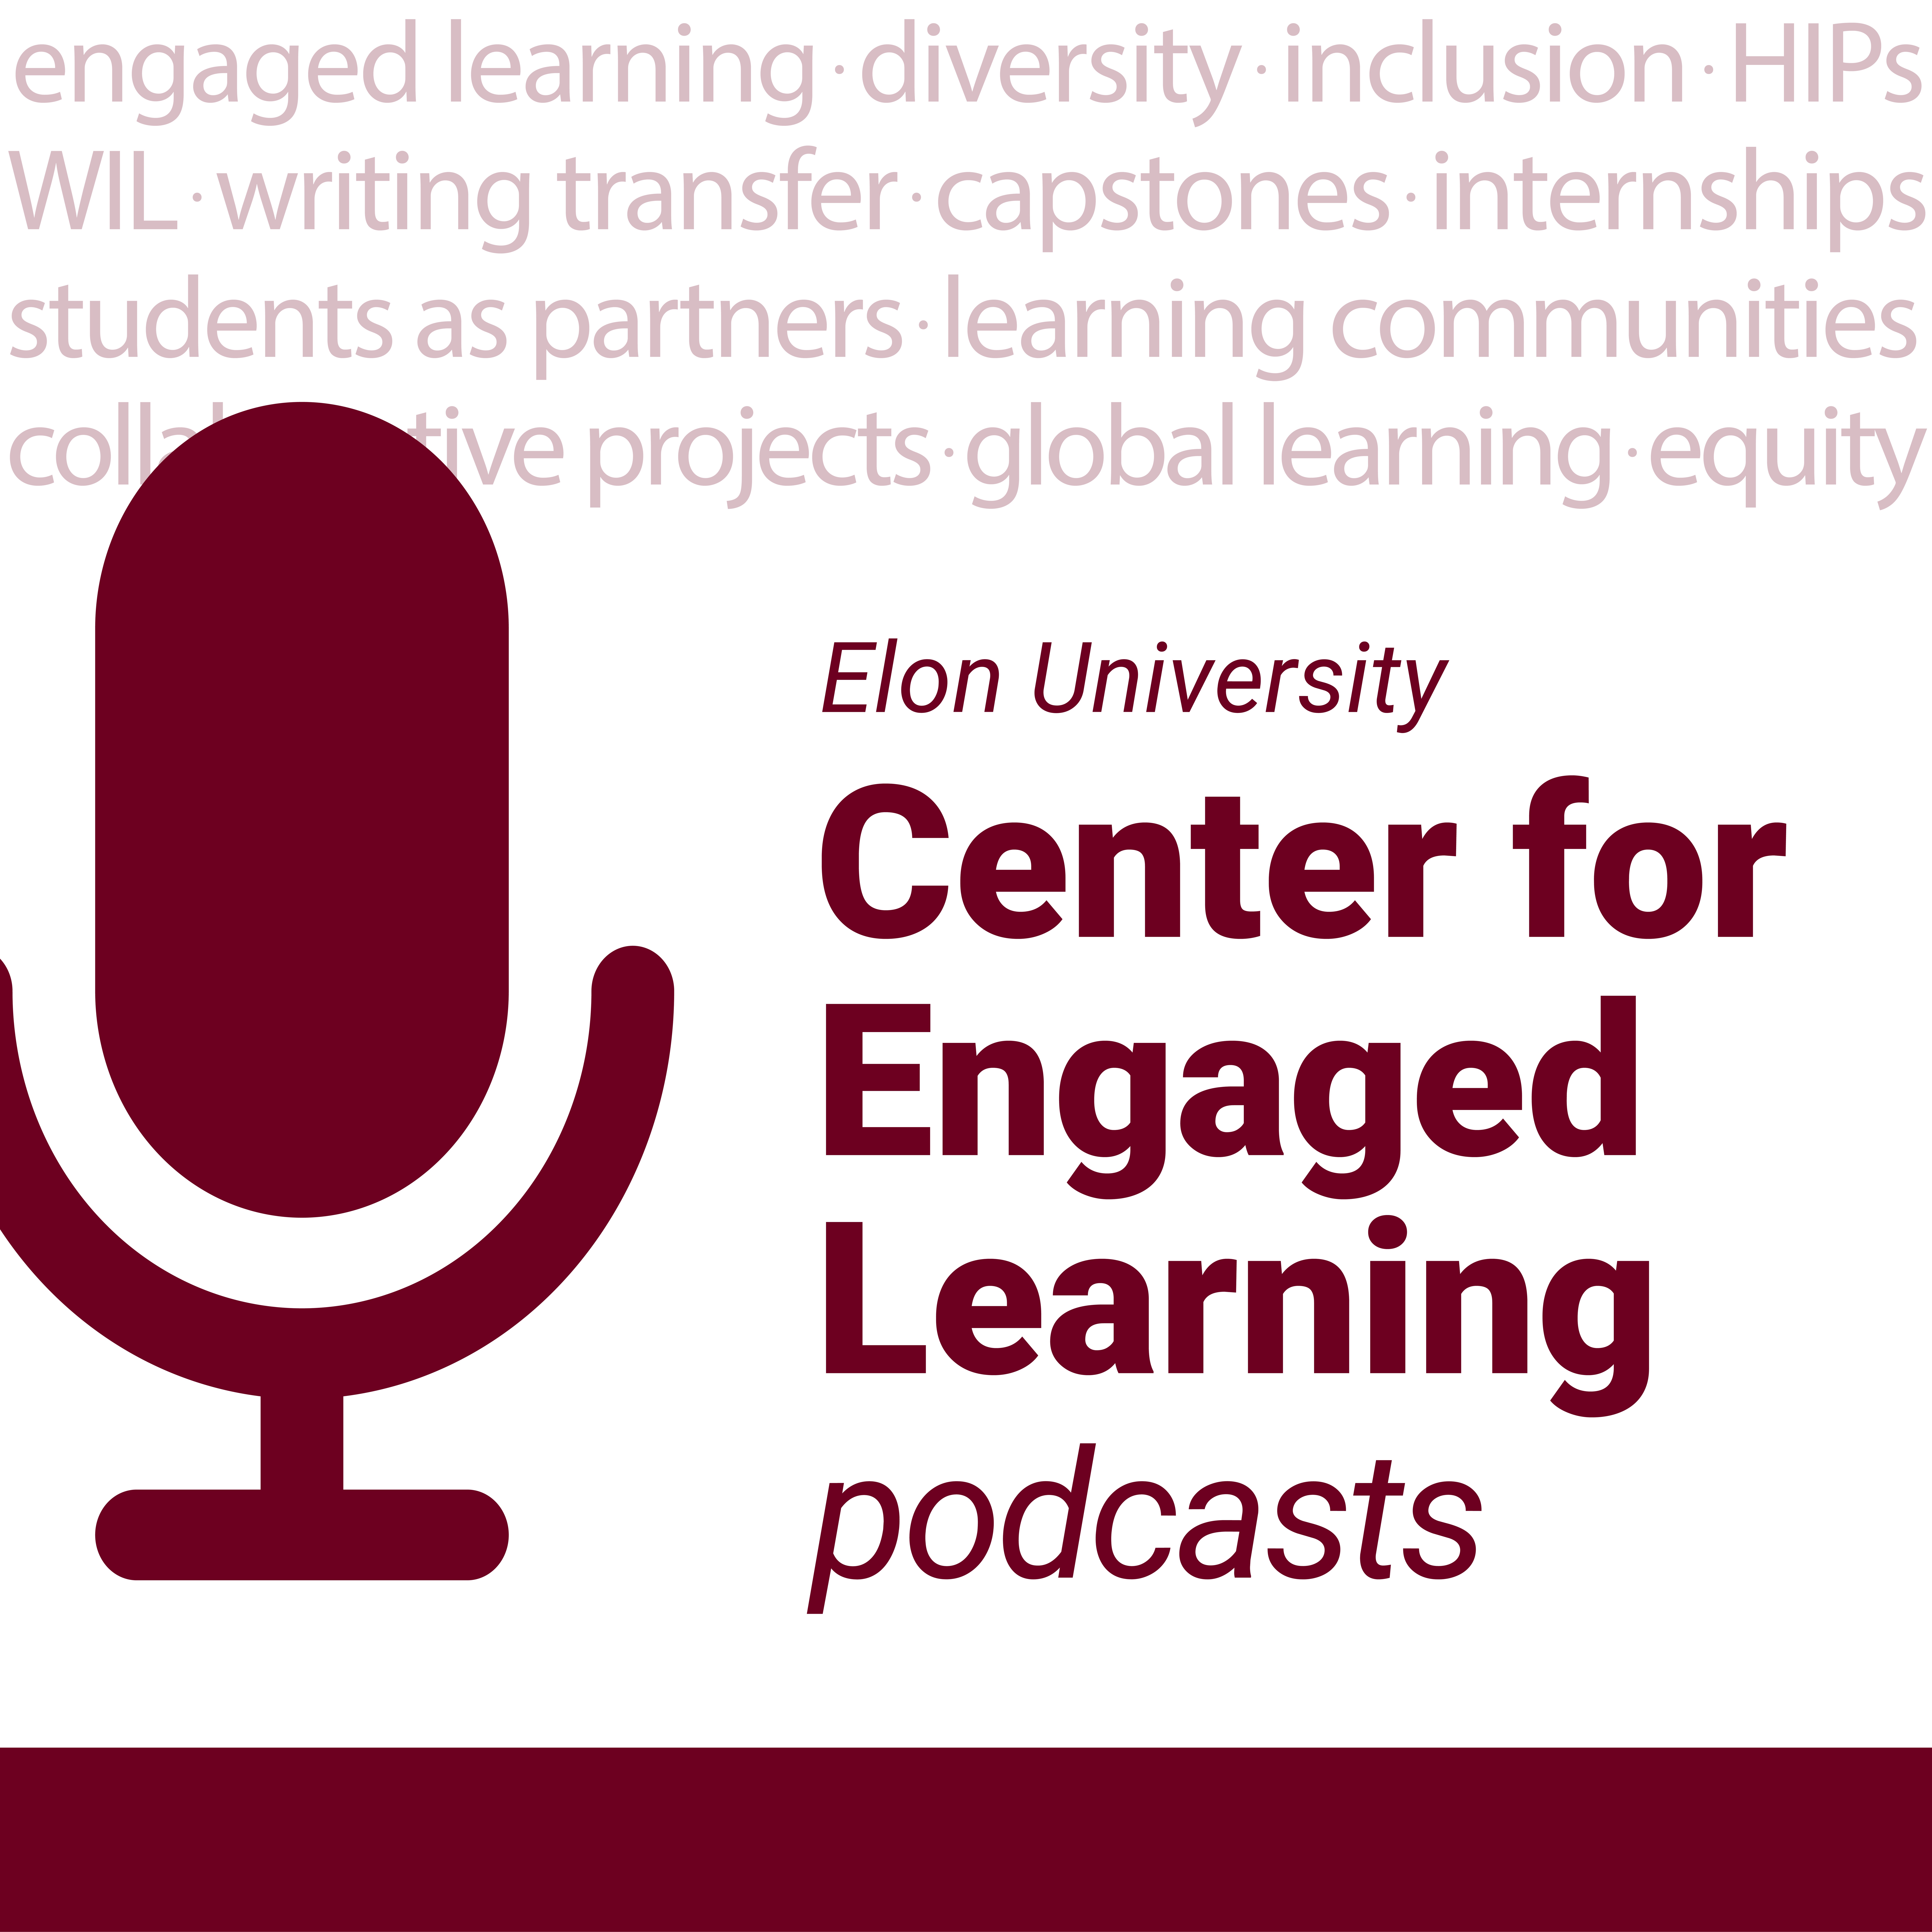 microphone icon next to "Elon University Center for Engaged Learning podcasts"